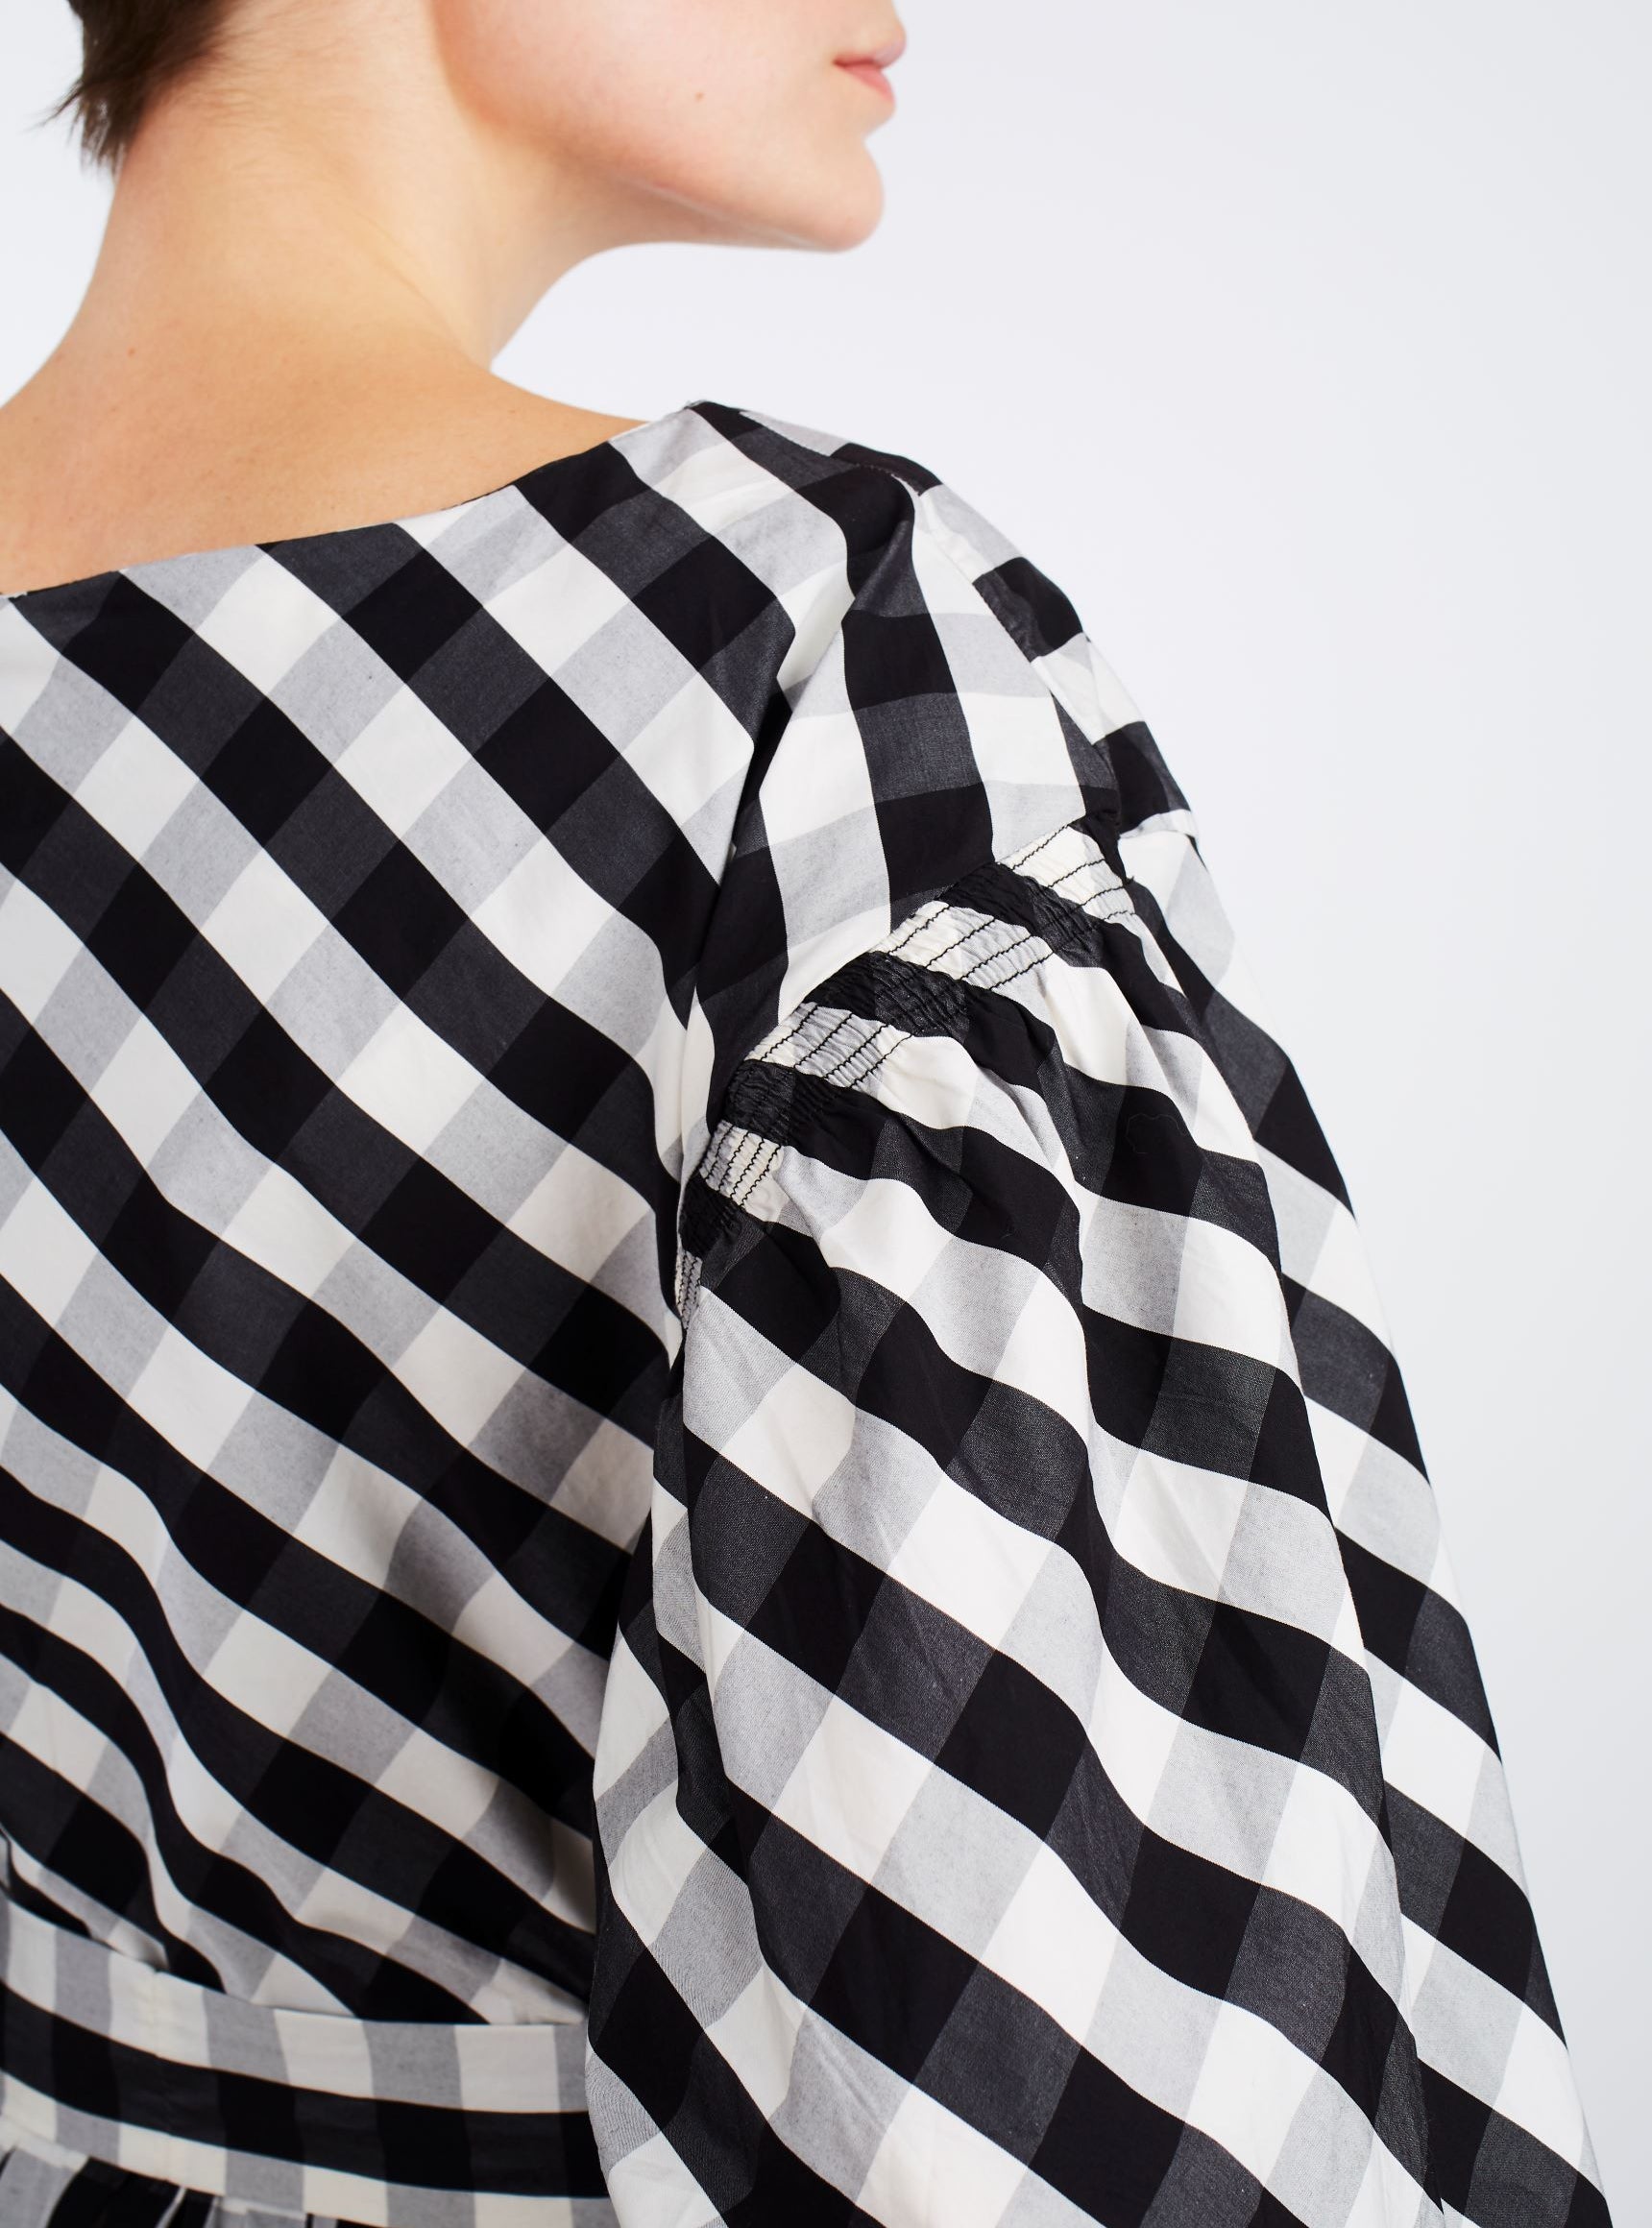 Detail sleeve Jane Black & White Cotton Dress by Thierry Colson